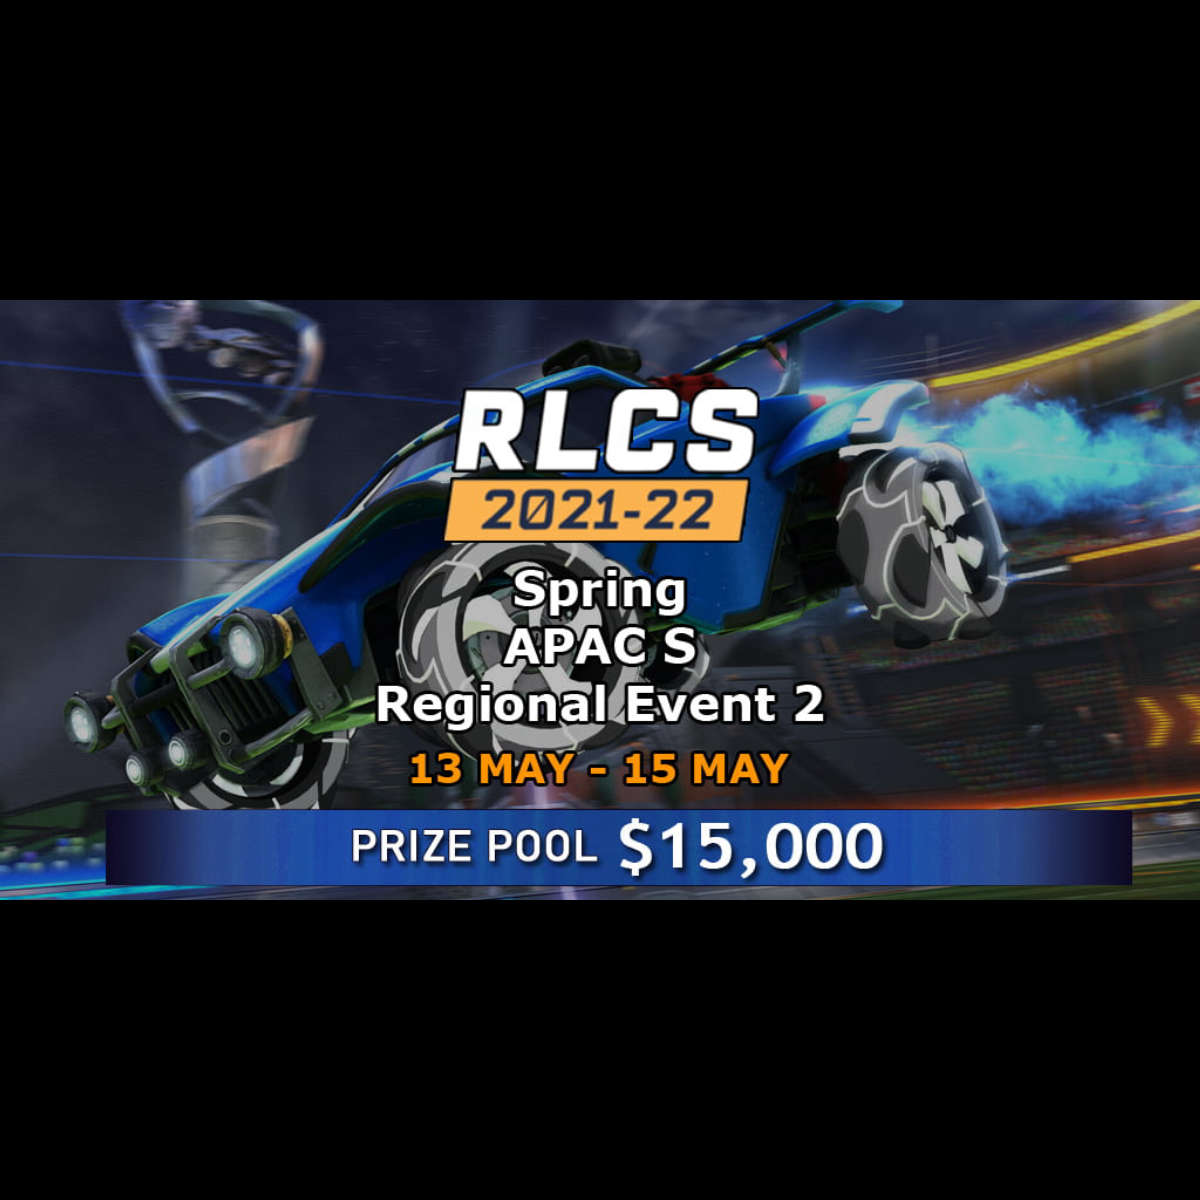 2021-22 RLCS Qualifiers - Spring: Regional Event 2 in Oceania, North  America and Asia-Pacific. Rocket League news - eSports events review,  analytics, announcements, interviews, statistics - eT0QAbXt3